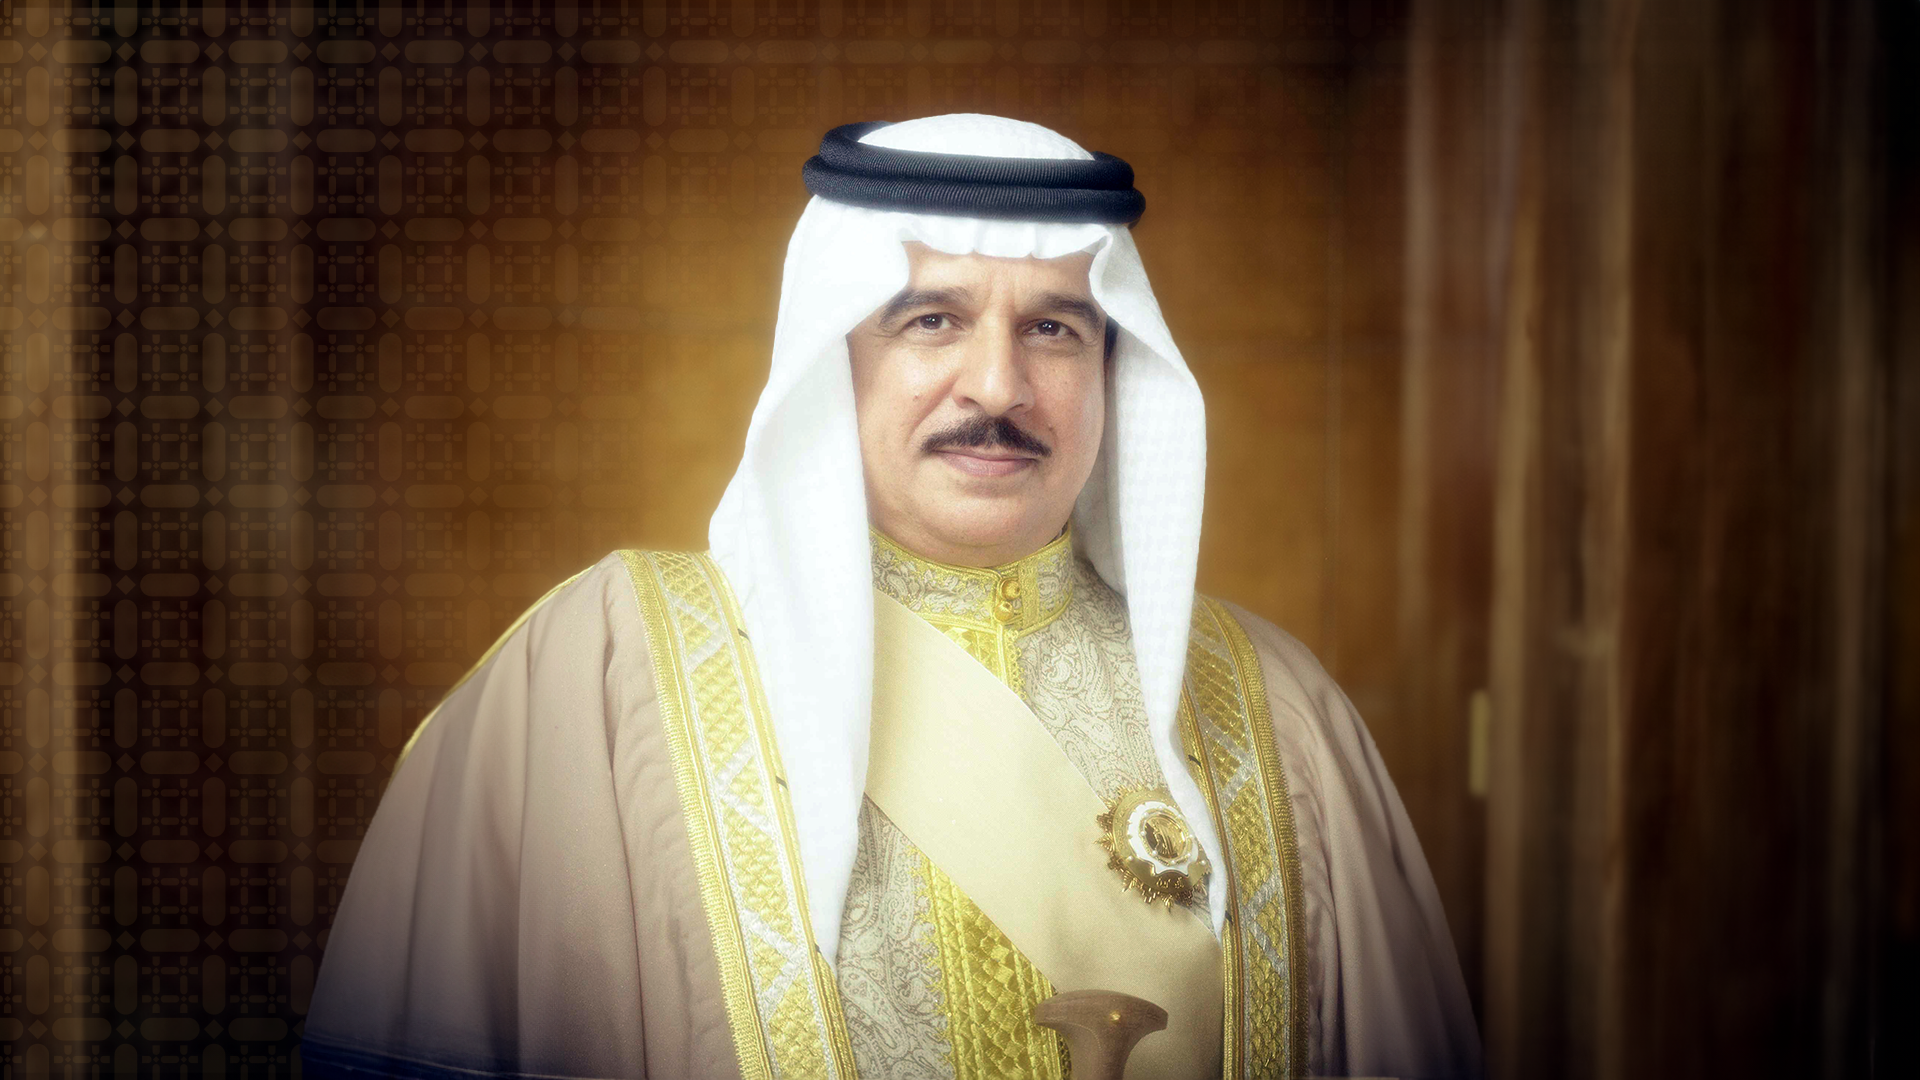 HM King issues Royal Order 14/2022, restructuring the Isa bin Salman Education Charitable Trust Board of Trustees